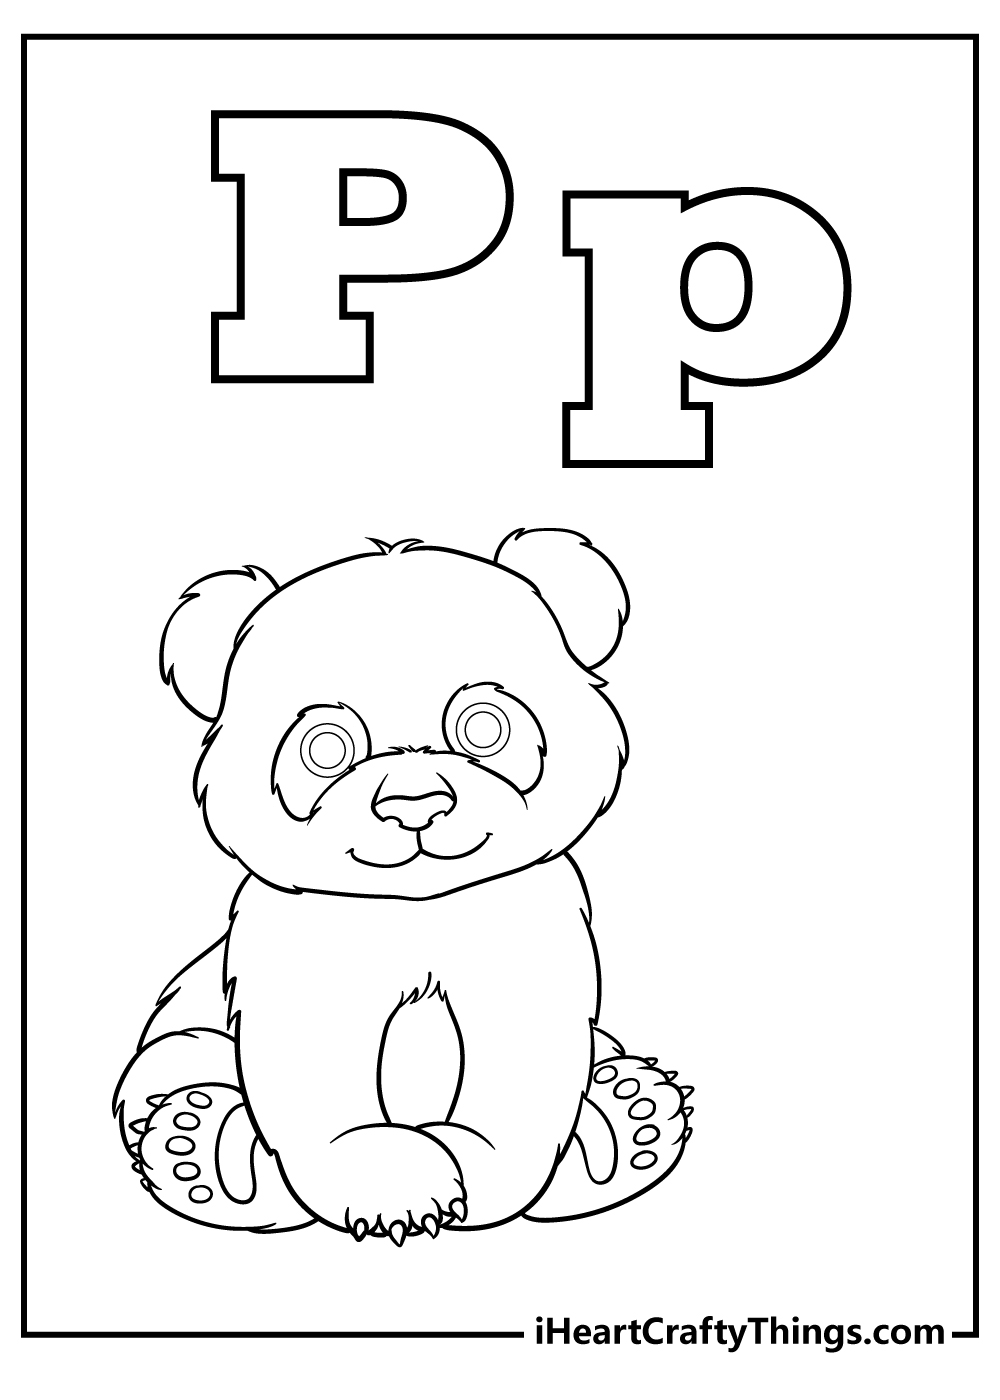 Letter P Coloring Book free printable